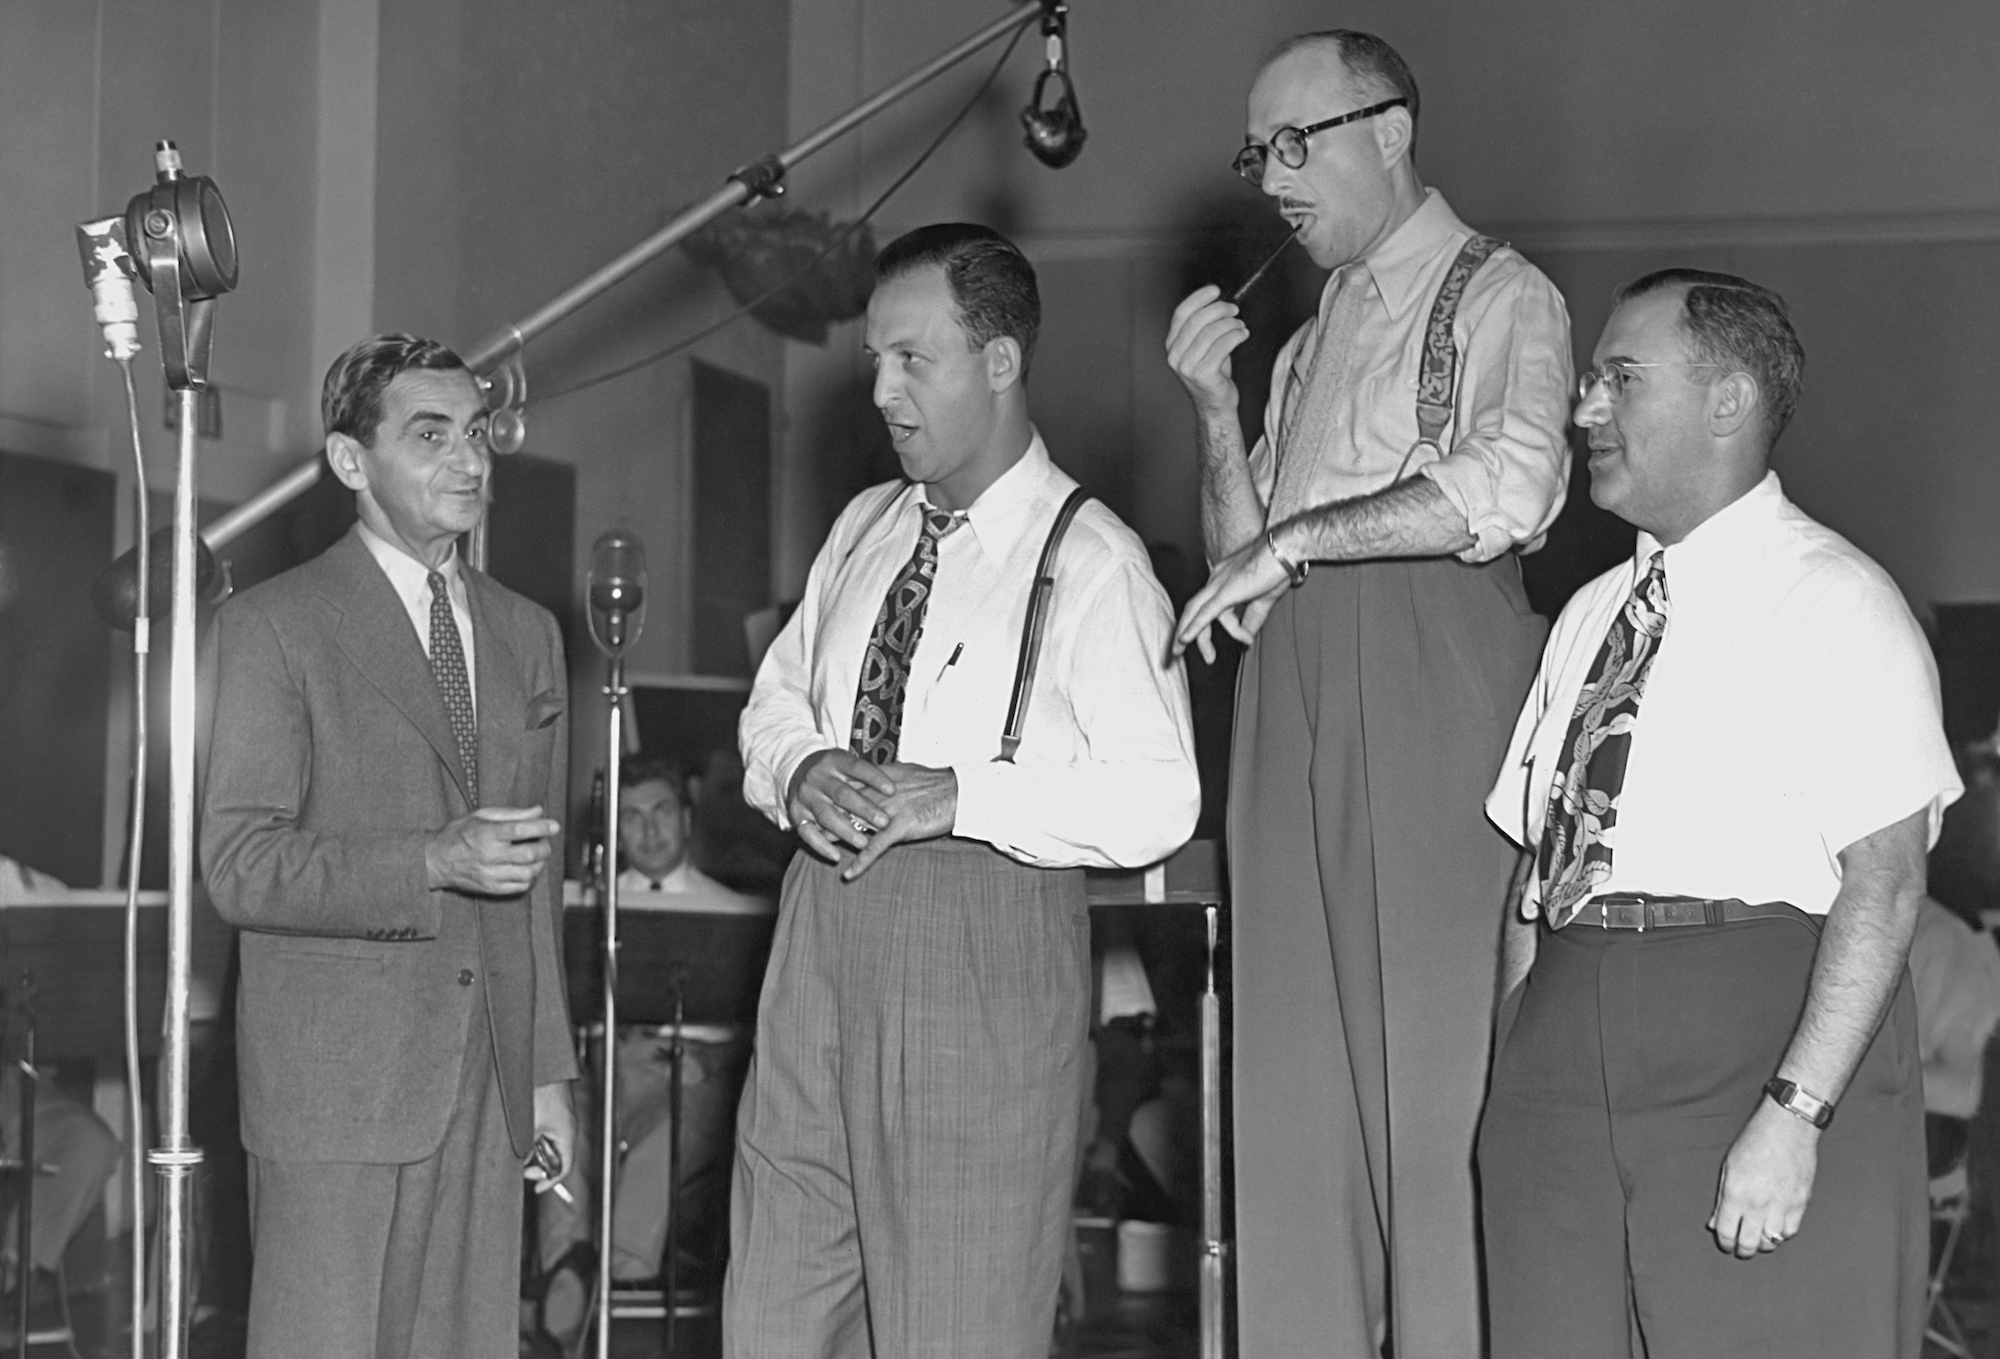 Composer Irving Berlin (1888 Ð 1989) with singer Barry Wood (1909 - 1970) and orchestra leader Ray Bloch (1902 - 1982) recording a song in the 1940's. (Photo by Archive Photos/Getty Images)